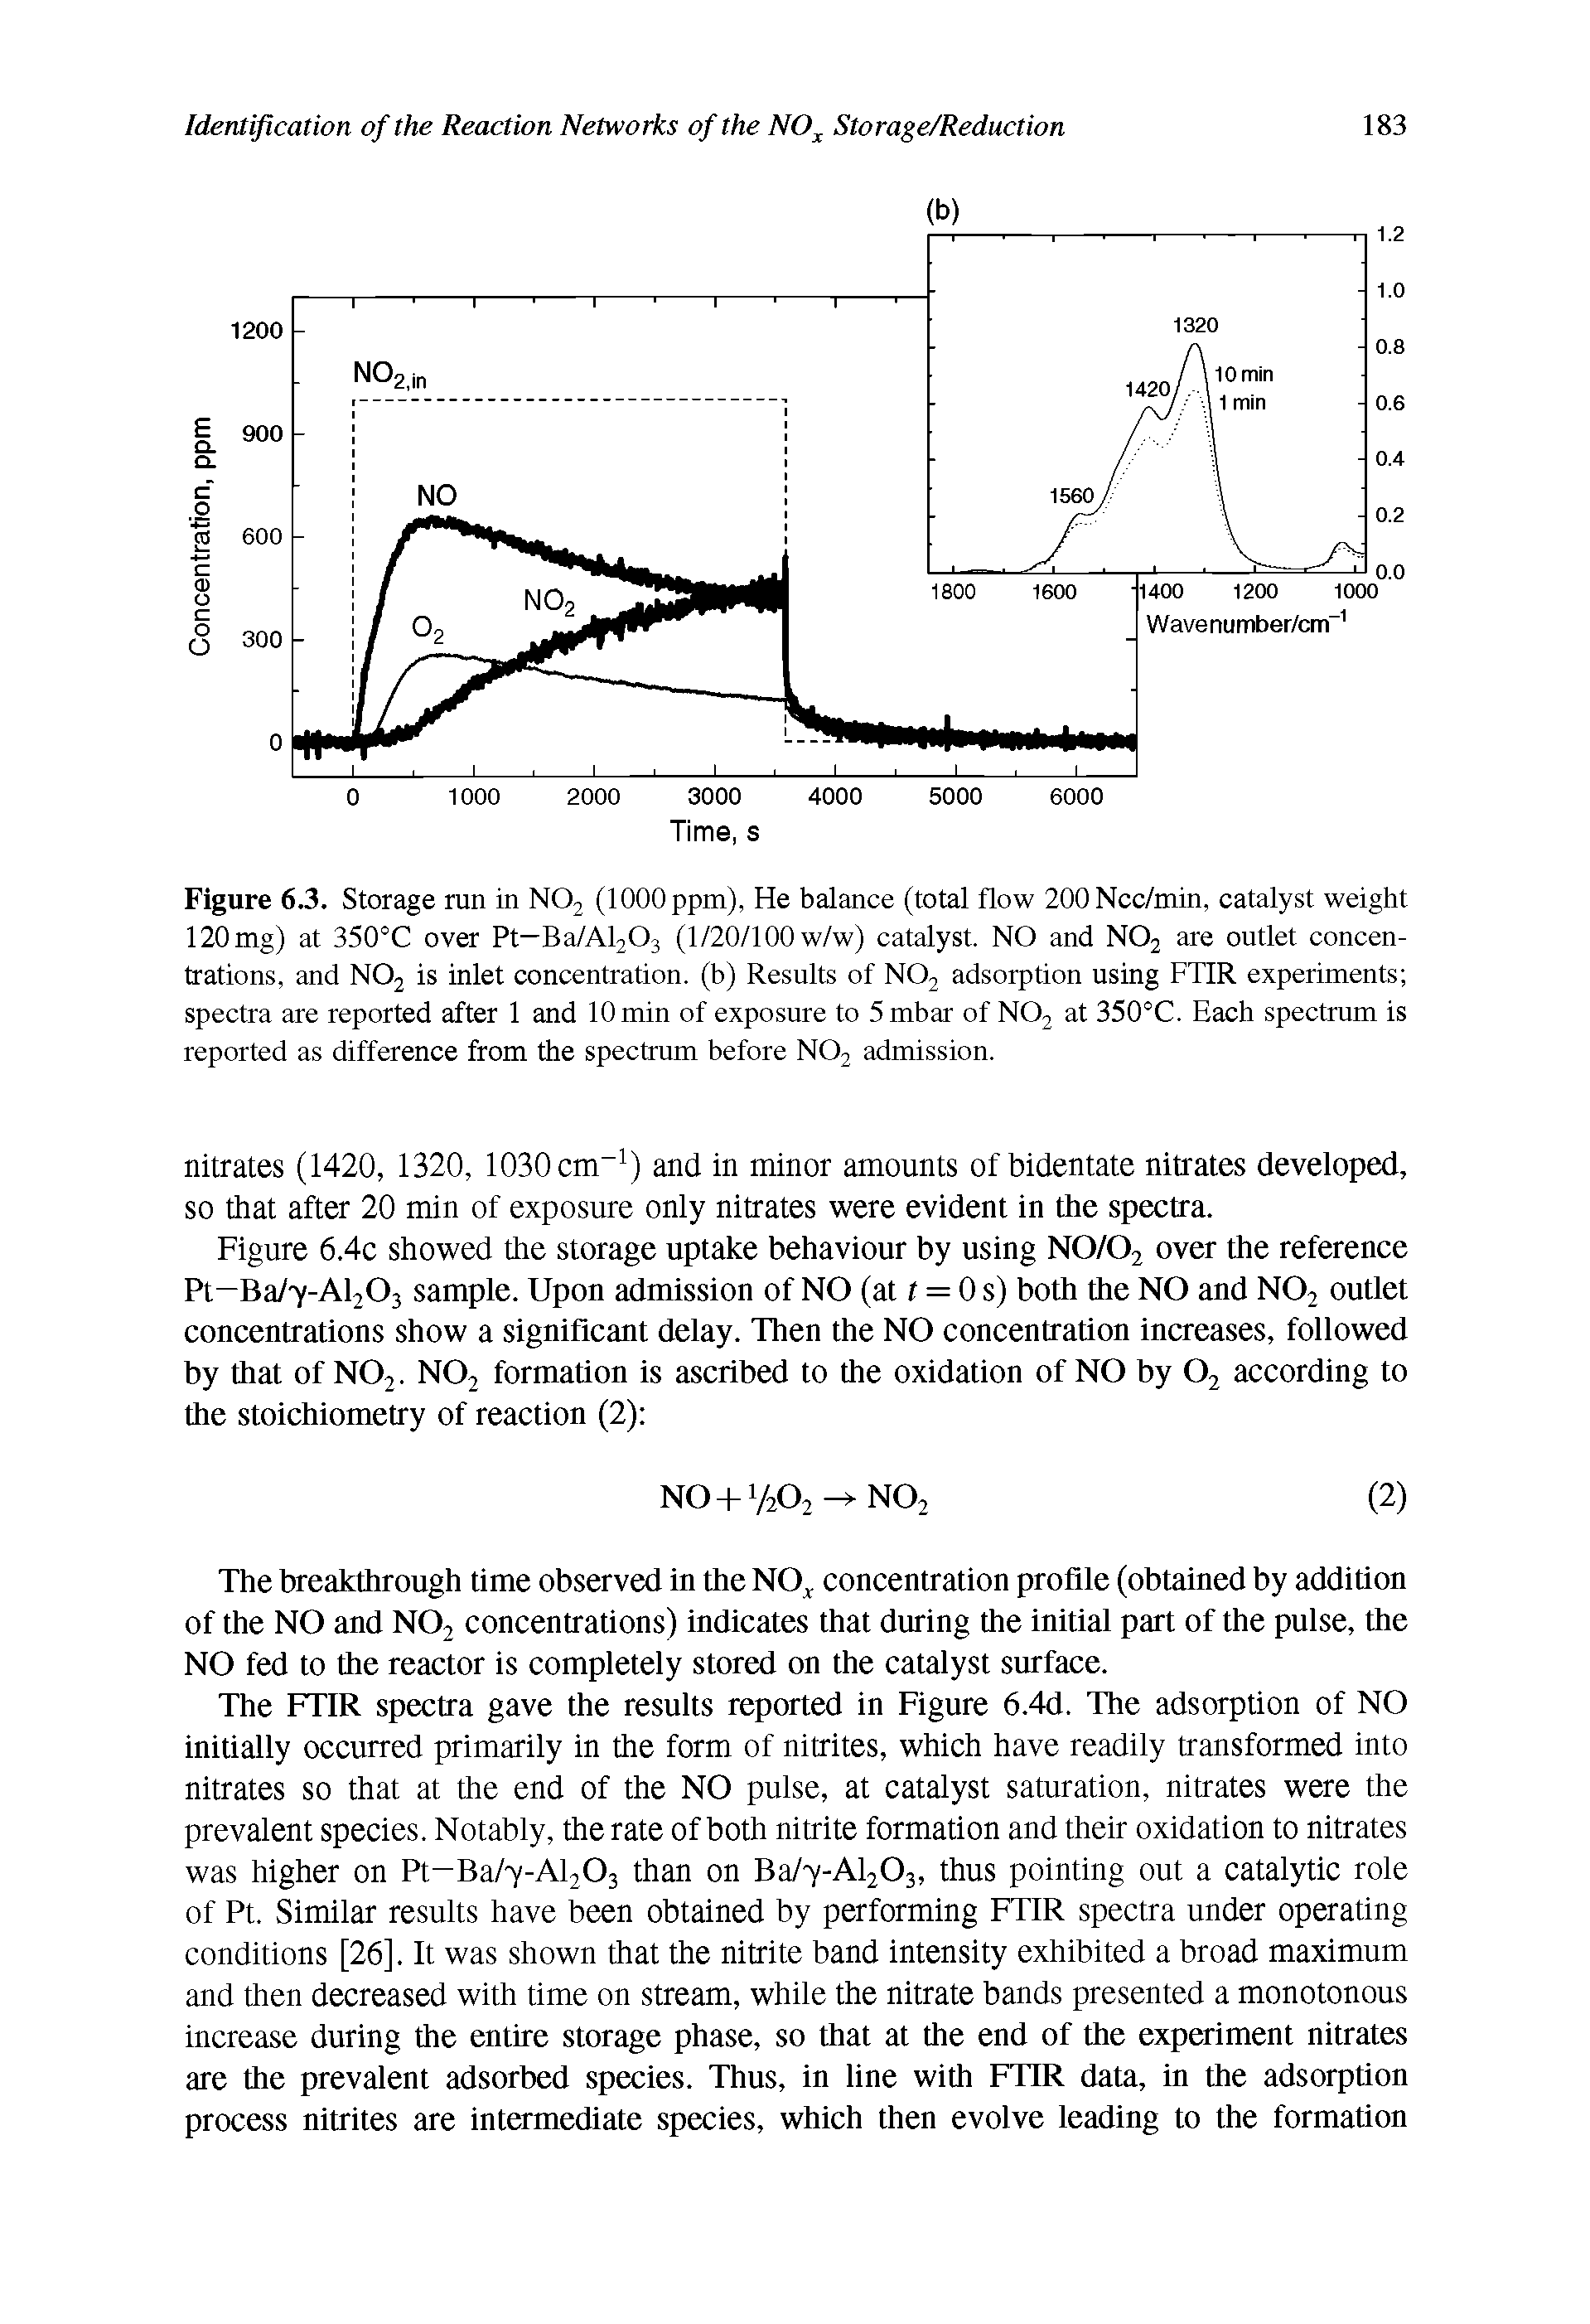 Figure 6.3. Storage run in N02 (1000 ppm), He balance (total flow 200Ncc/min, catalyst weight 120mg) at 350°C over Pt—Ba/Al203 (1/20/100w/w) catalyst. NO and N02 are outlet concentrations, and N02 is inlet concentration, (b) Results of N02 adsorption using FTIR experiments spectra are reported after 1 and 10 min of exposure to 5mbar of N02 at 350°C. Each spectrum is reported as difference from the spectrum before N02 admission.